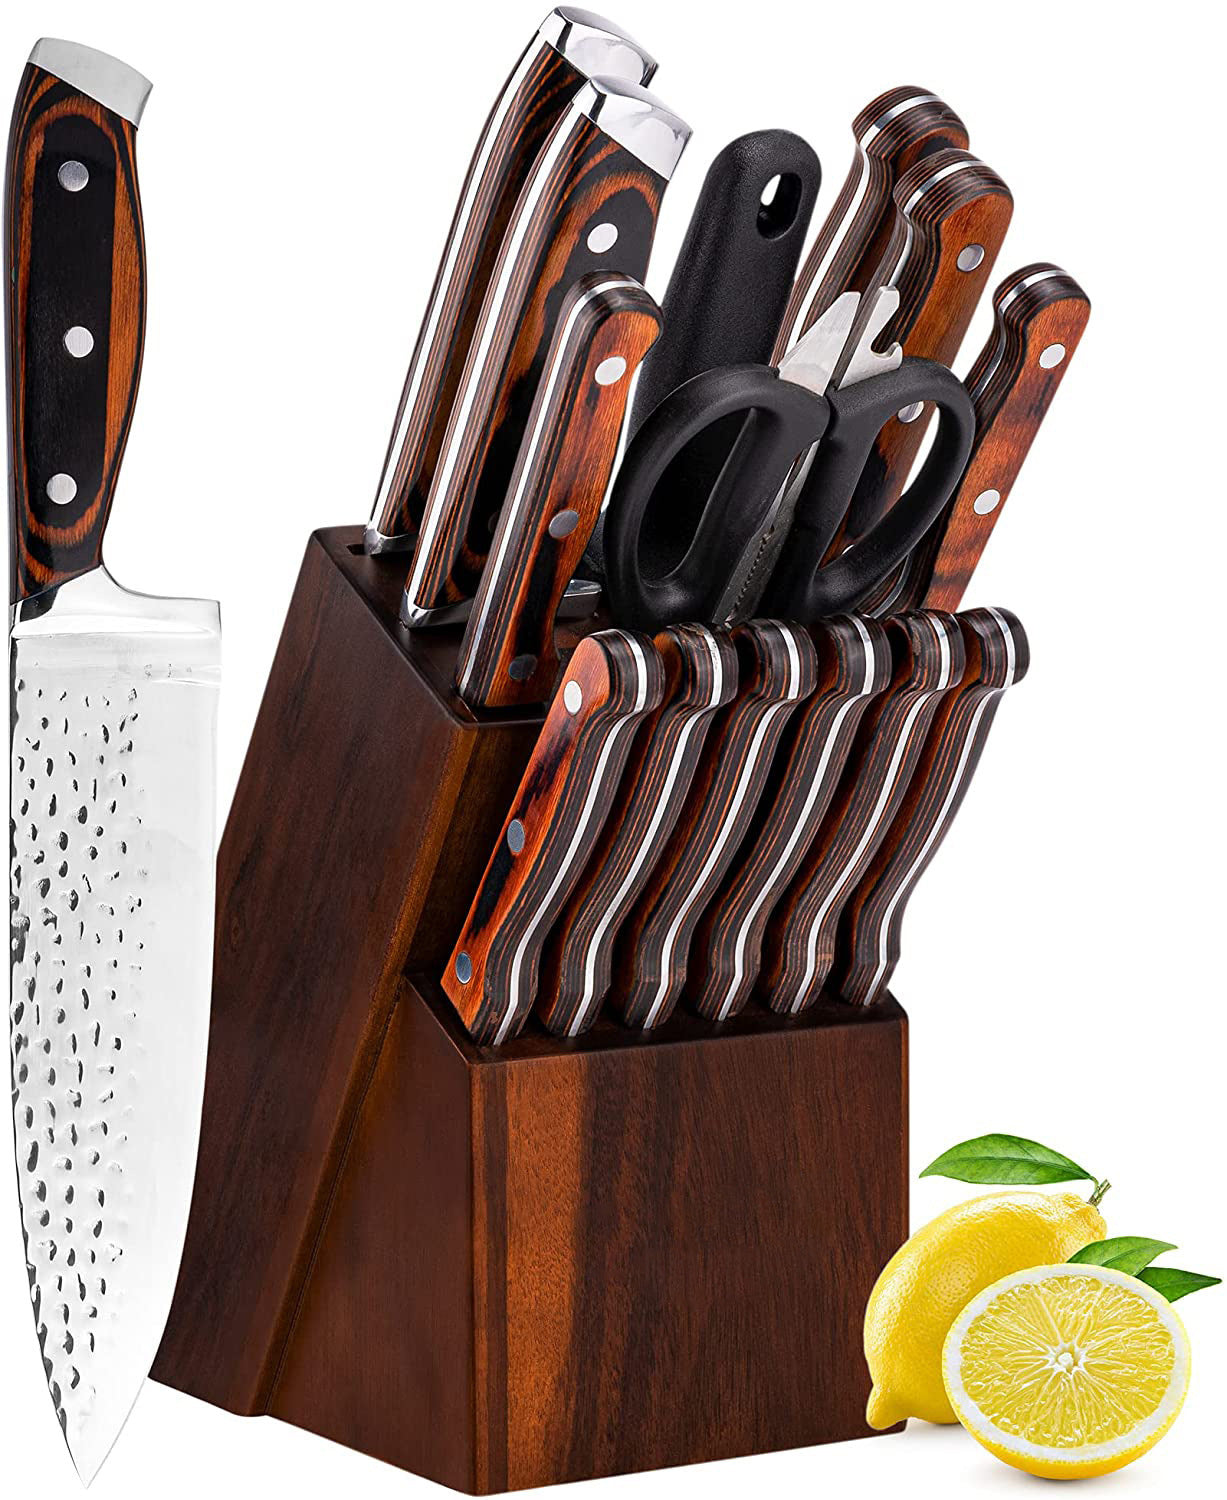 Set Of 15 Hammered And Forged Chef's Knives For Domestic Use